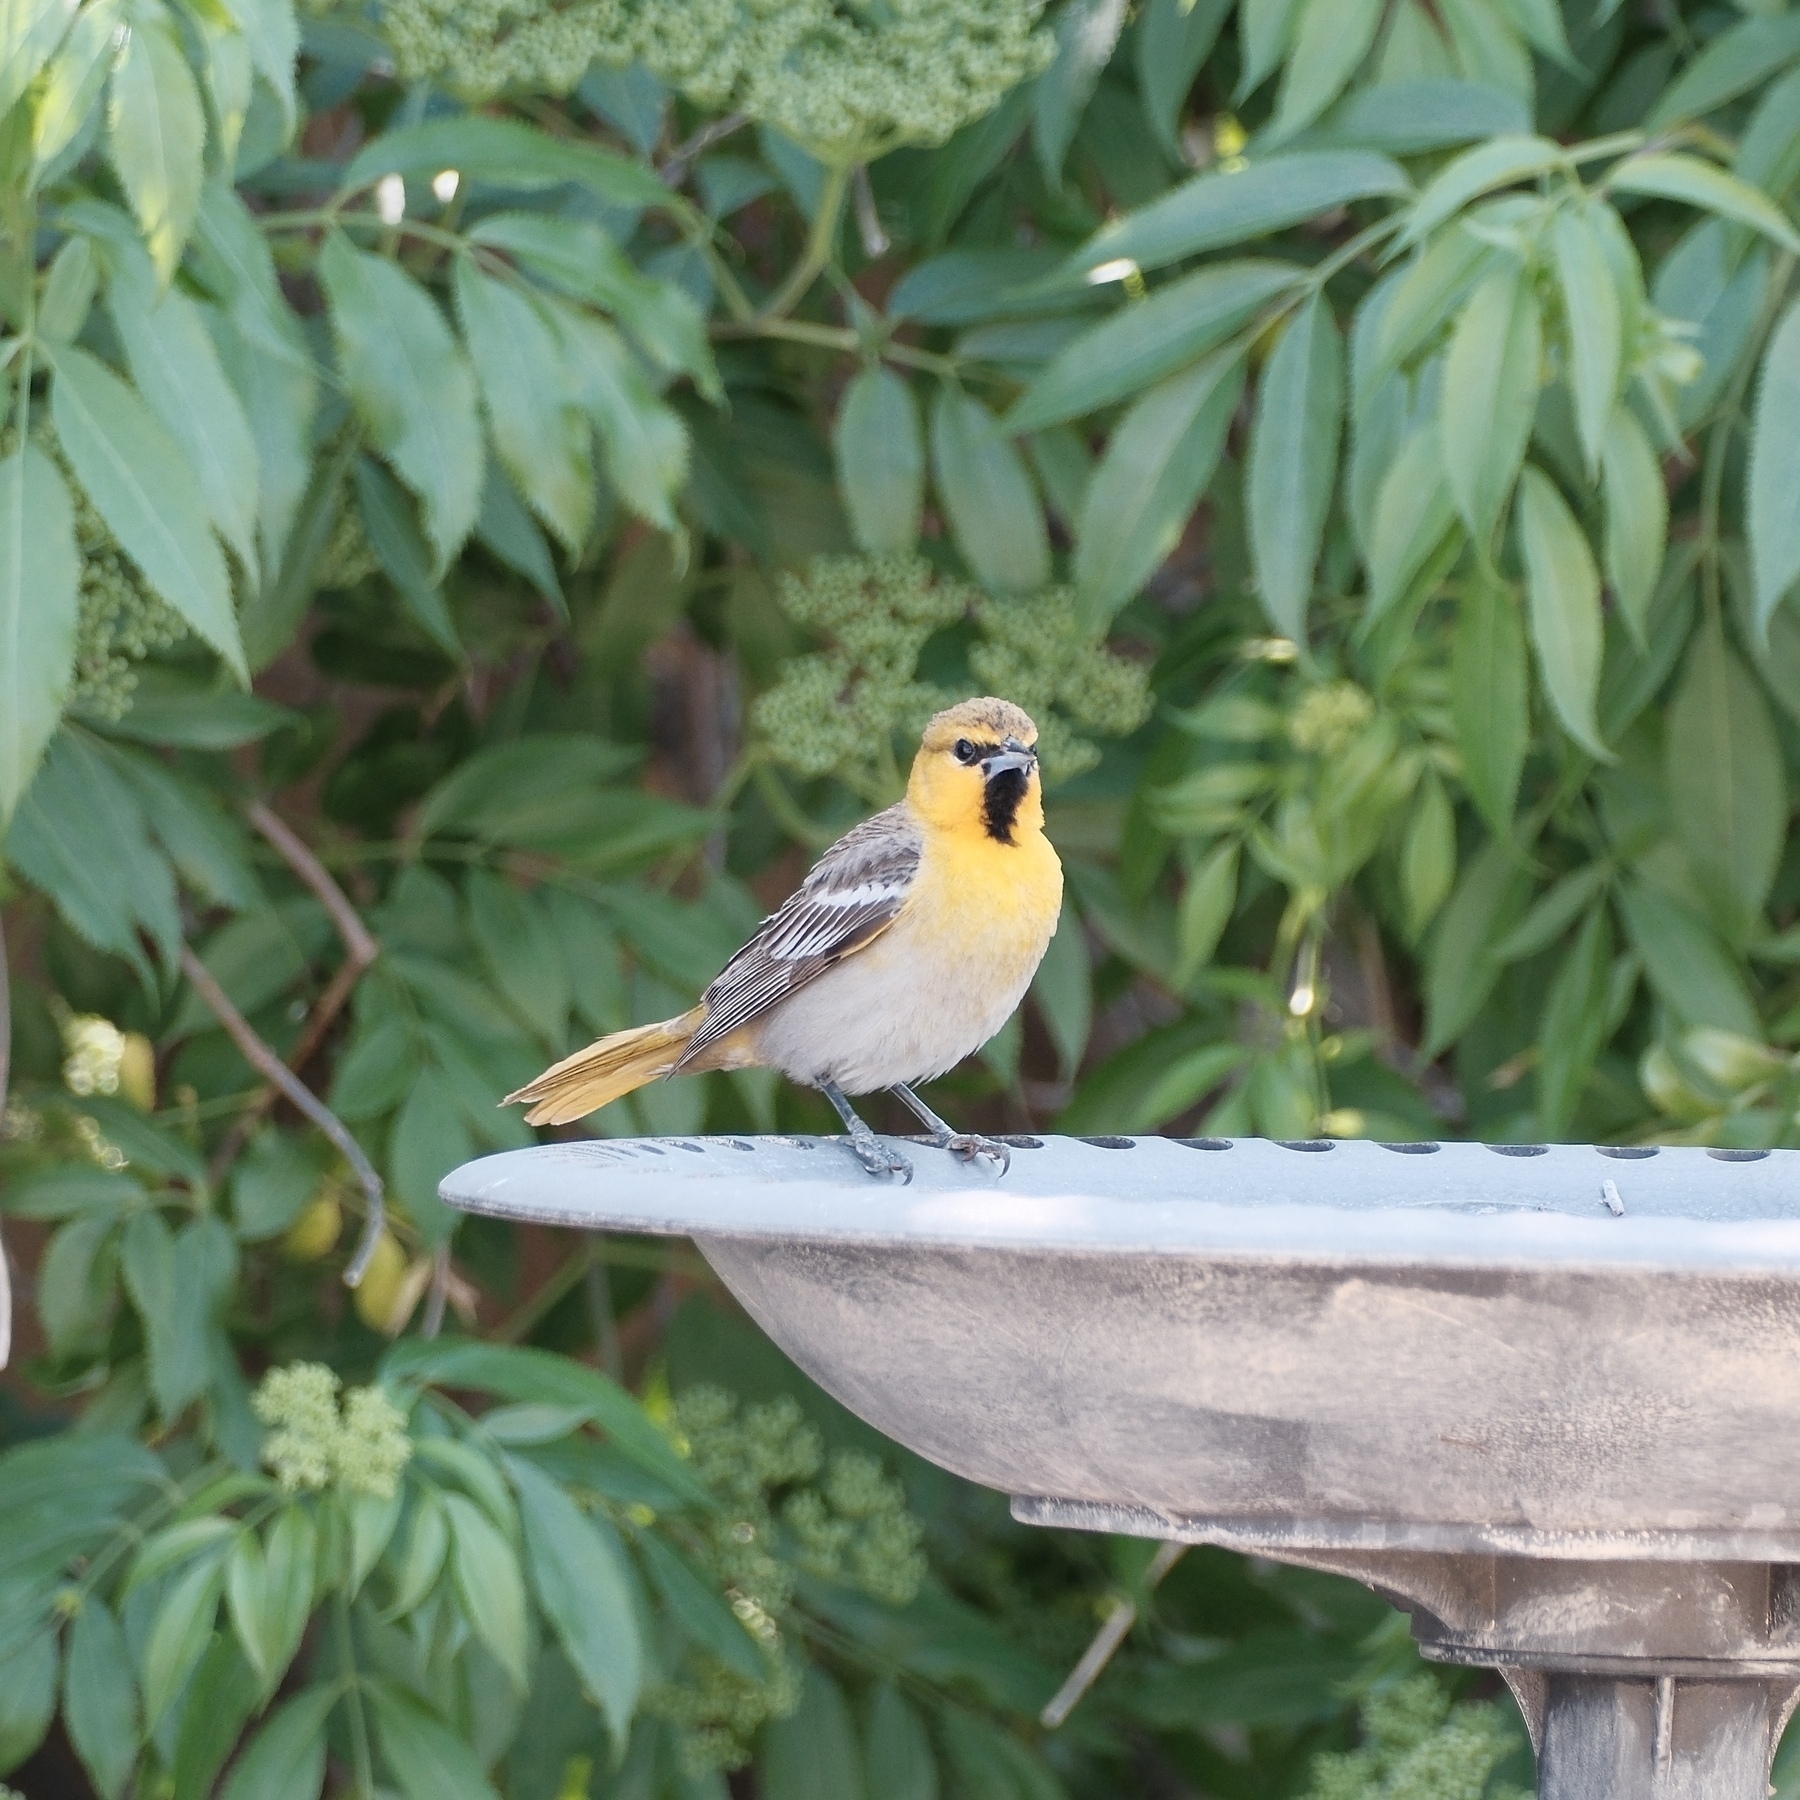 A female Bullock’s Oriole is perched at the edge of a bird bath that’s in front of an elderberry bush. The bird has a fully gray back with white bars on its exposed right wing. Its upper chest is yellow-orange. Her head is orange from the eyes down to the chest though there’s a strip of black below it’s chin. The bird has black around its eyes and has a gray cap.